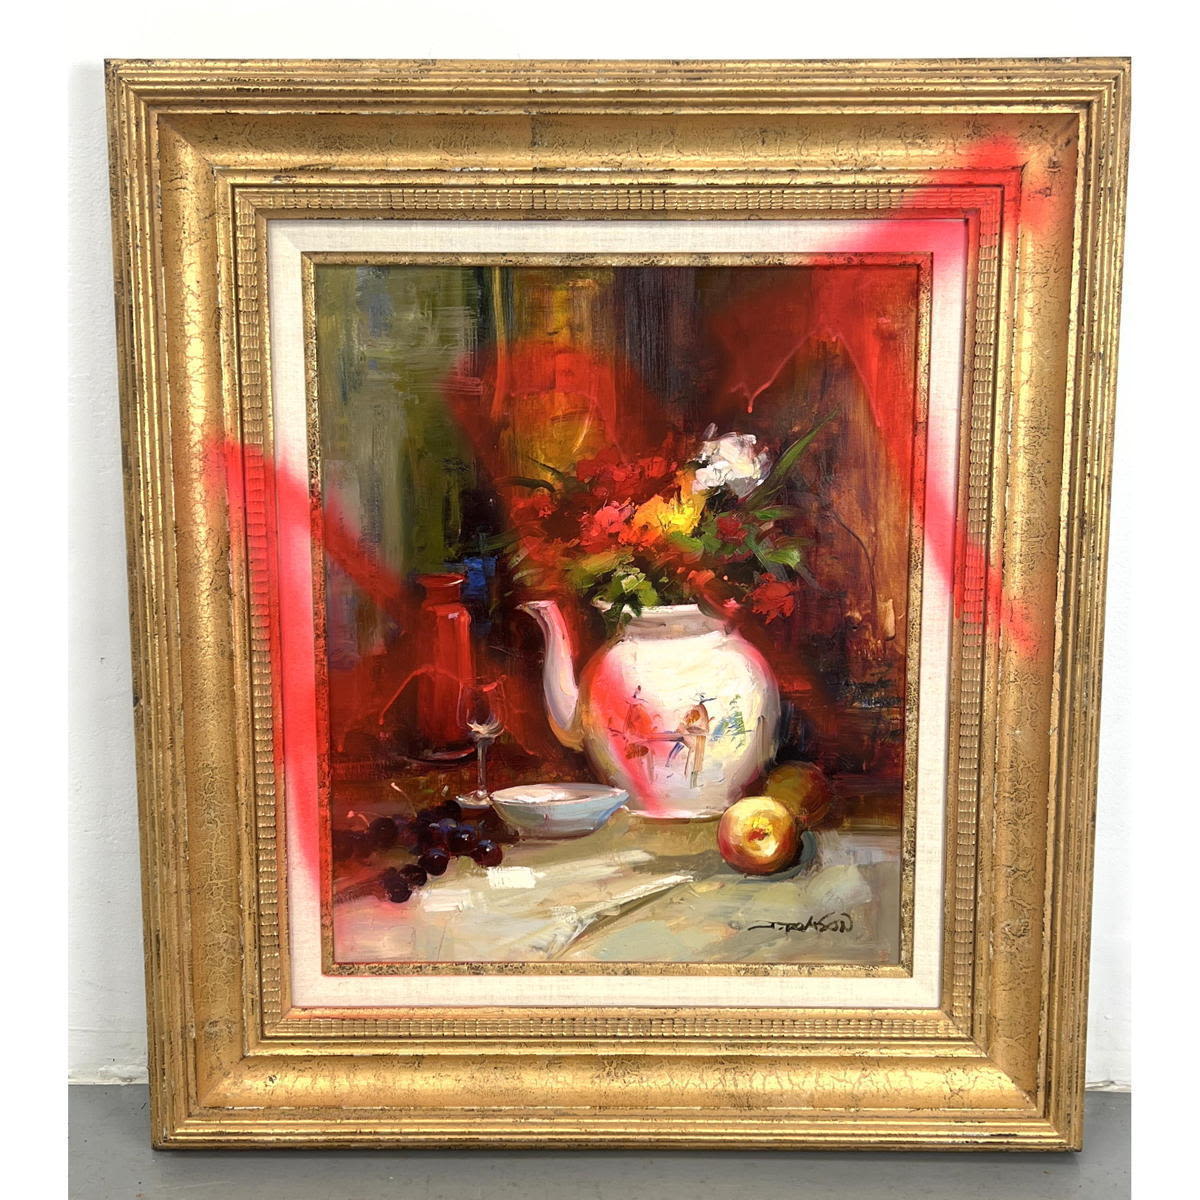 Painted still life painting with